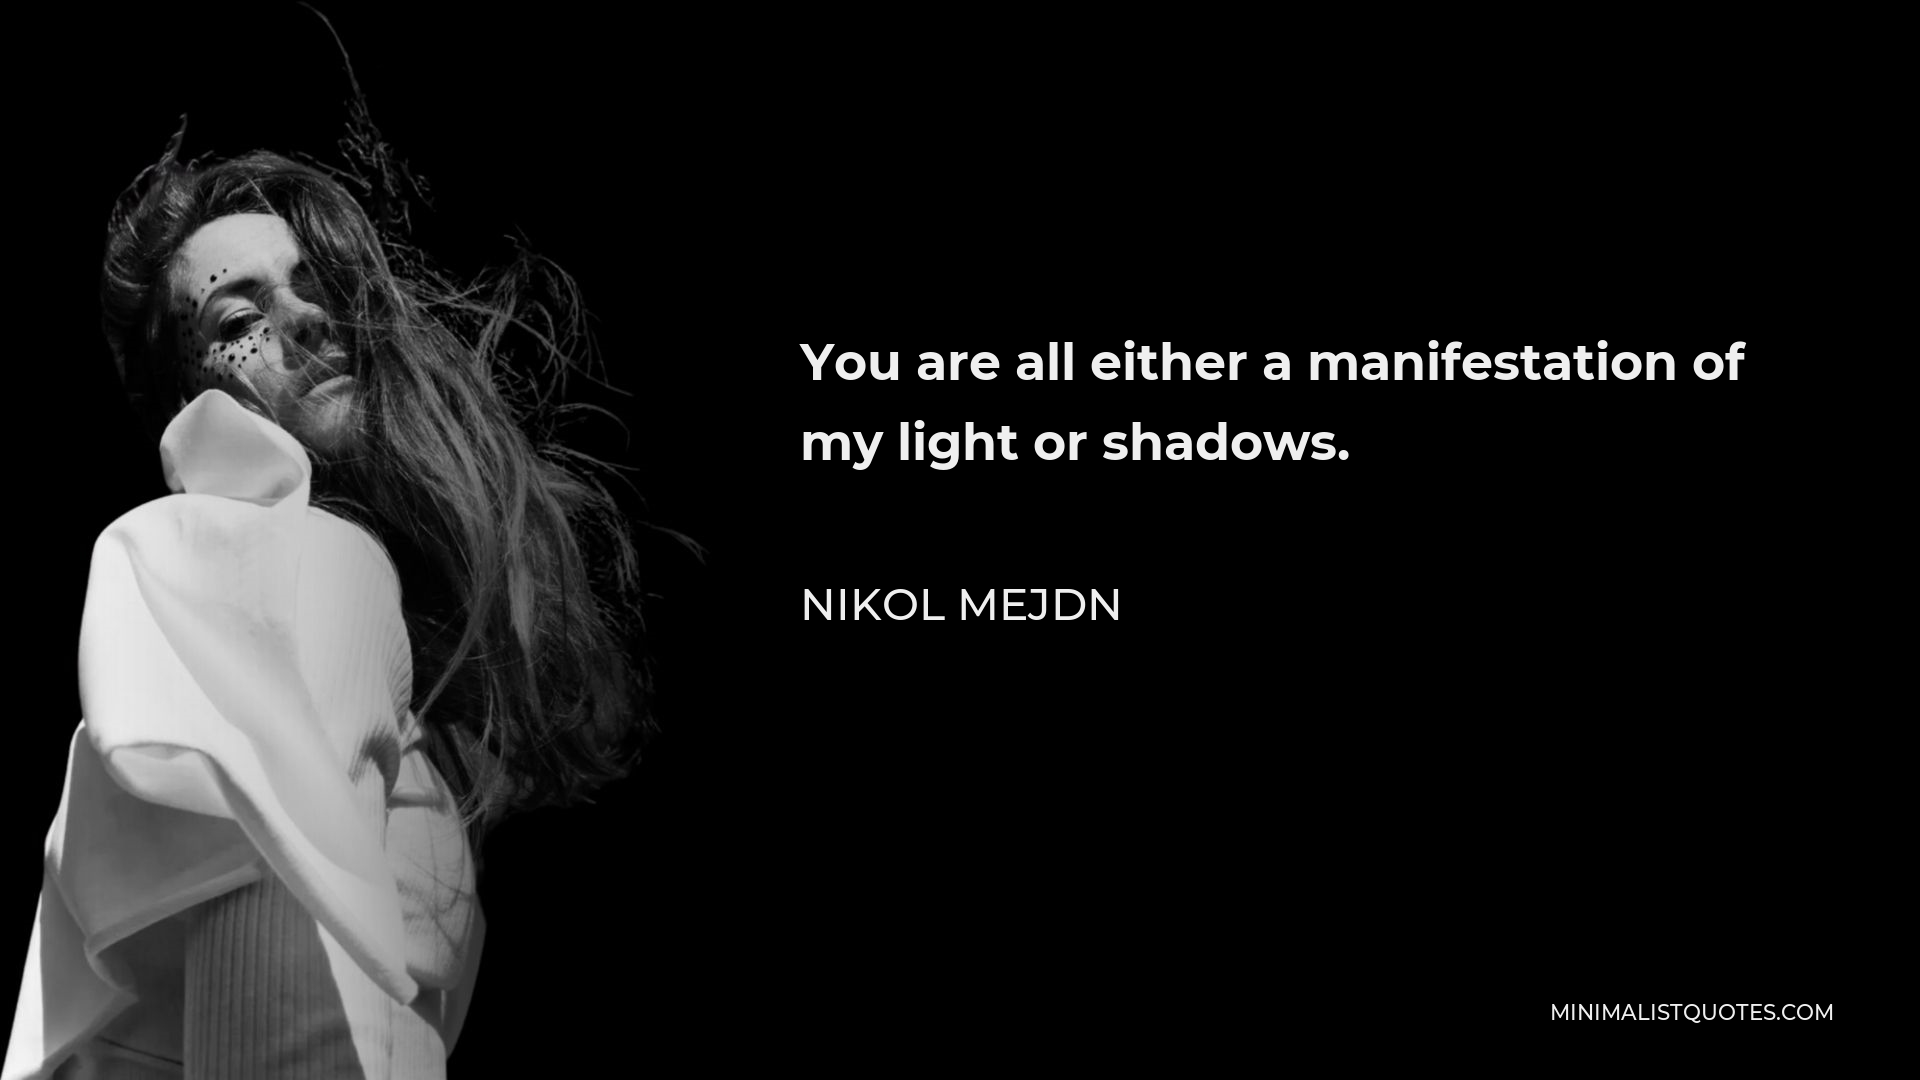 Nikol Mejdn Quote - You are all either a manifestation of my light or shadows.